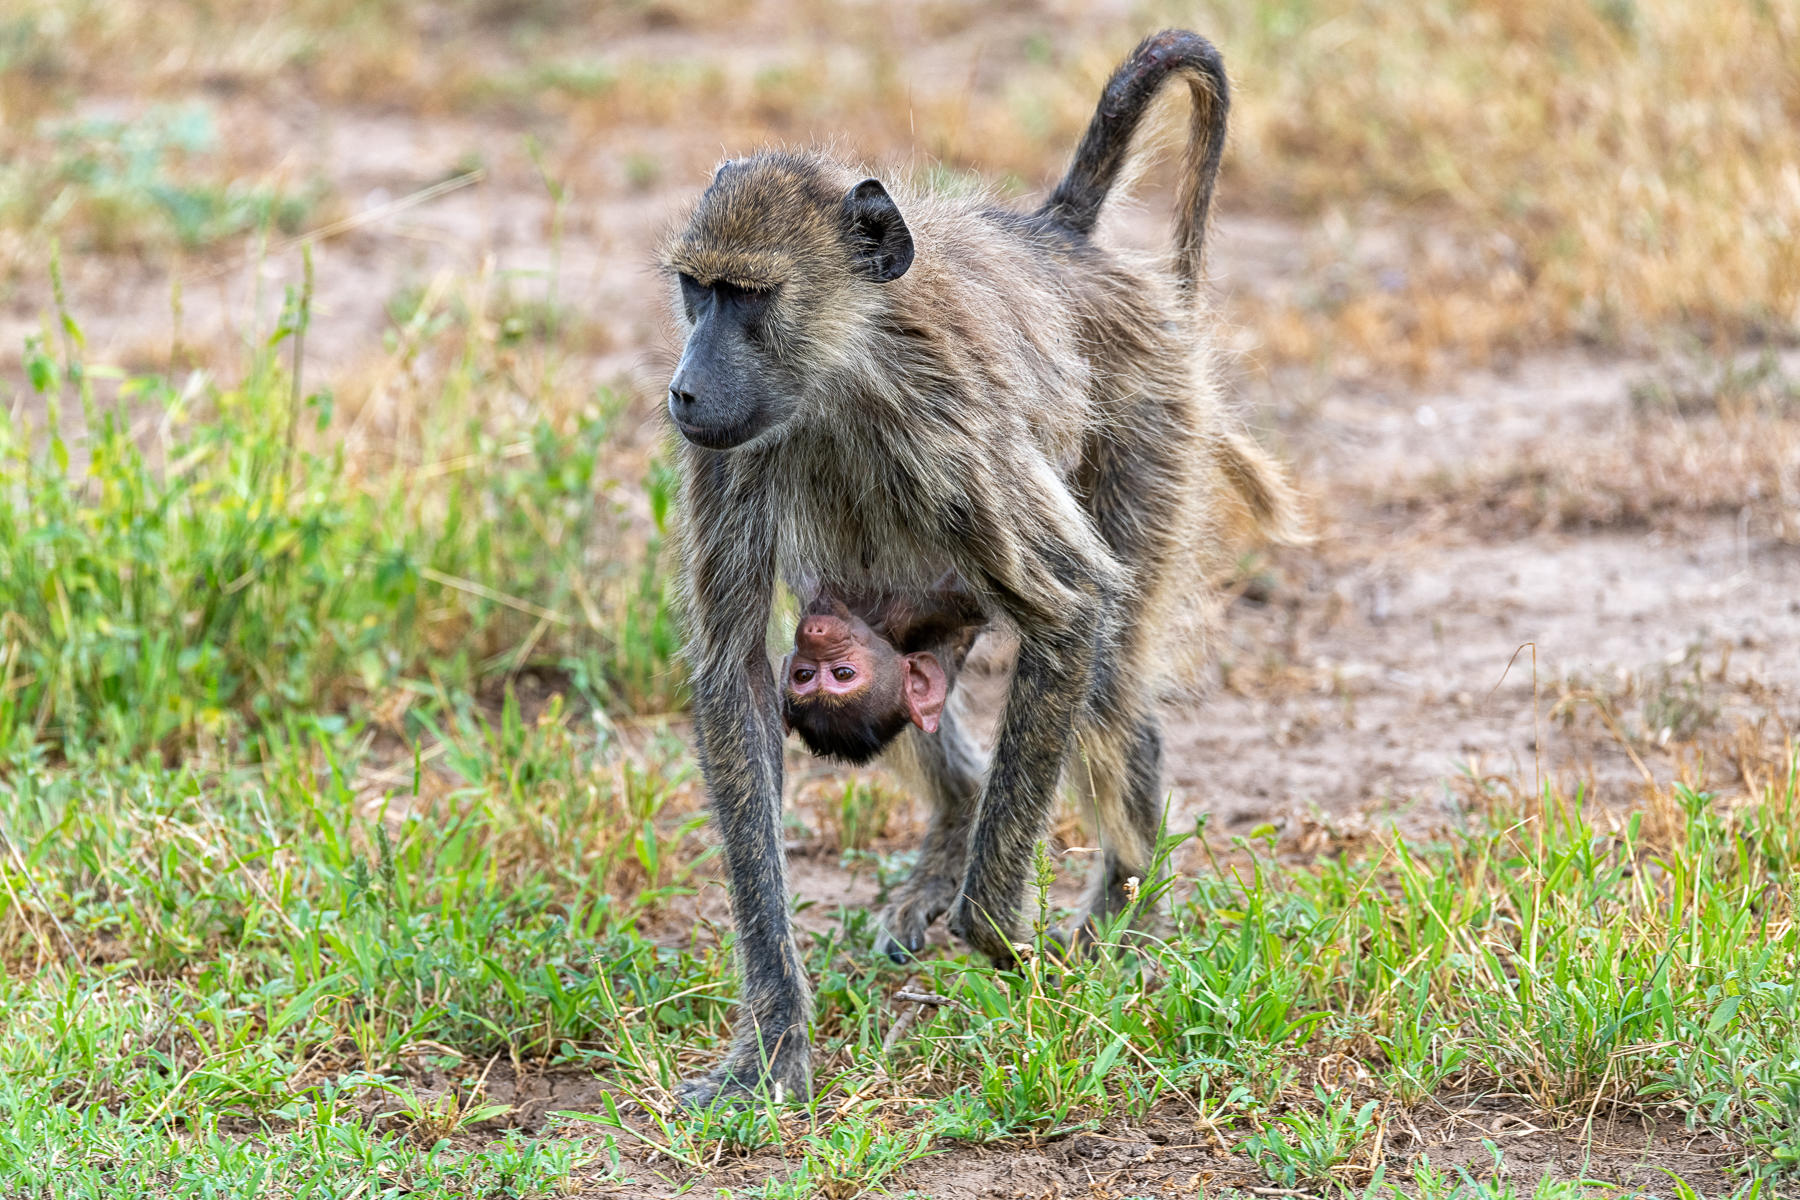 Baboon and Baby : Earthbound : ELIZABETH SANJUAN PHOTOGRAPHY